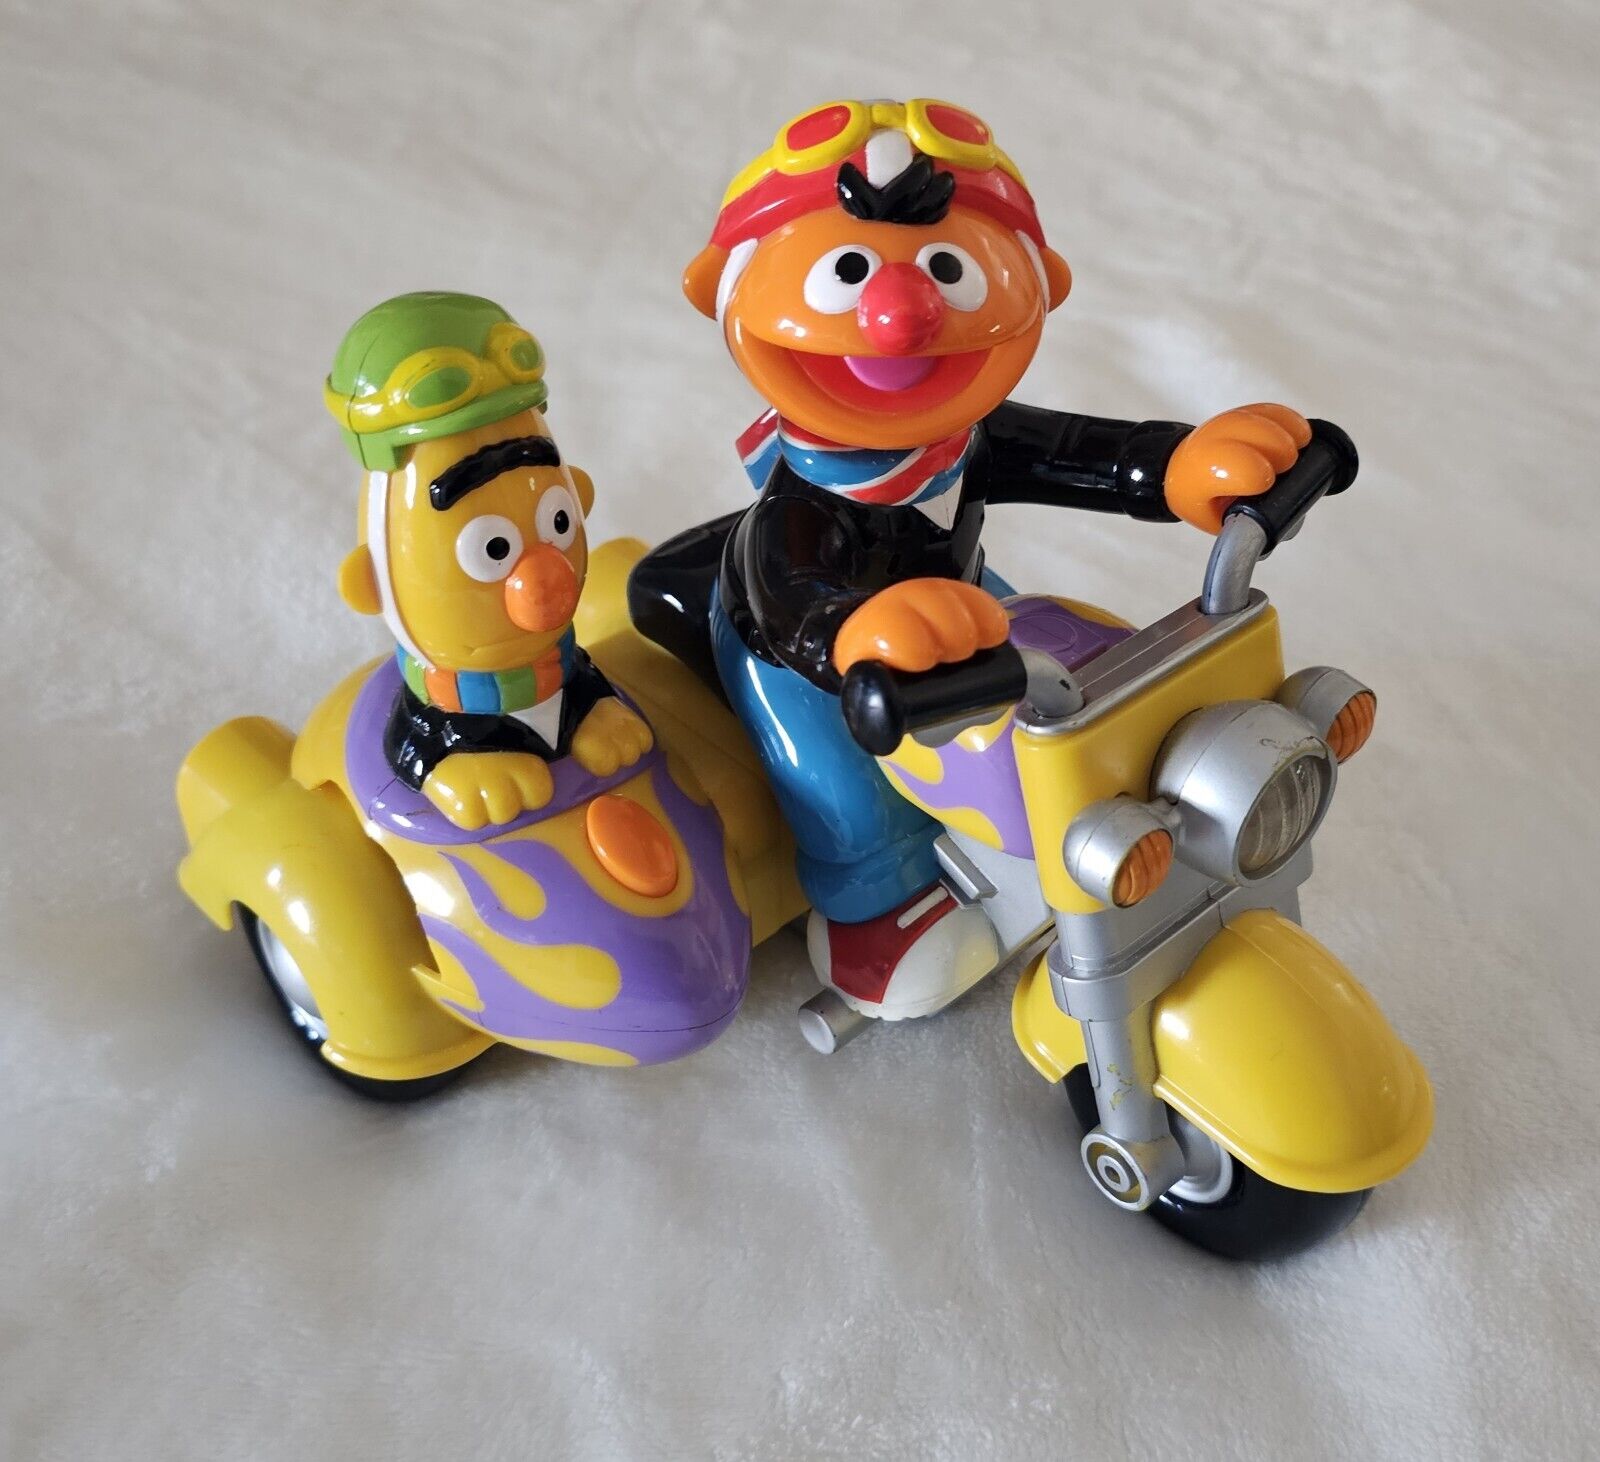 2000 Mattel Bert and Ernie Revin Sounds Motorcycle Toy WORKS Sesame Street